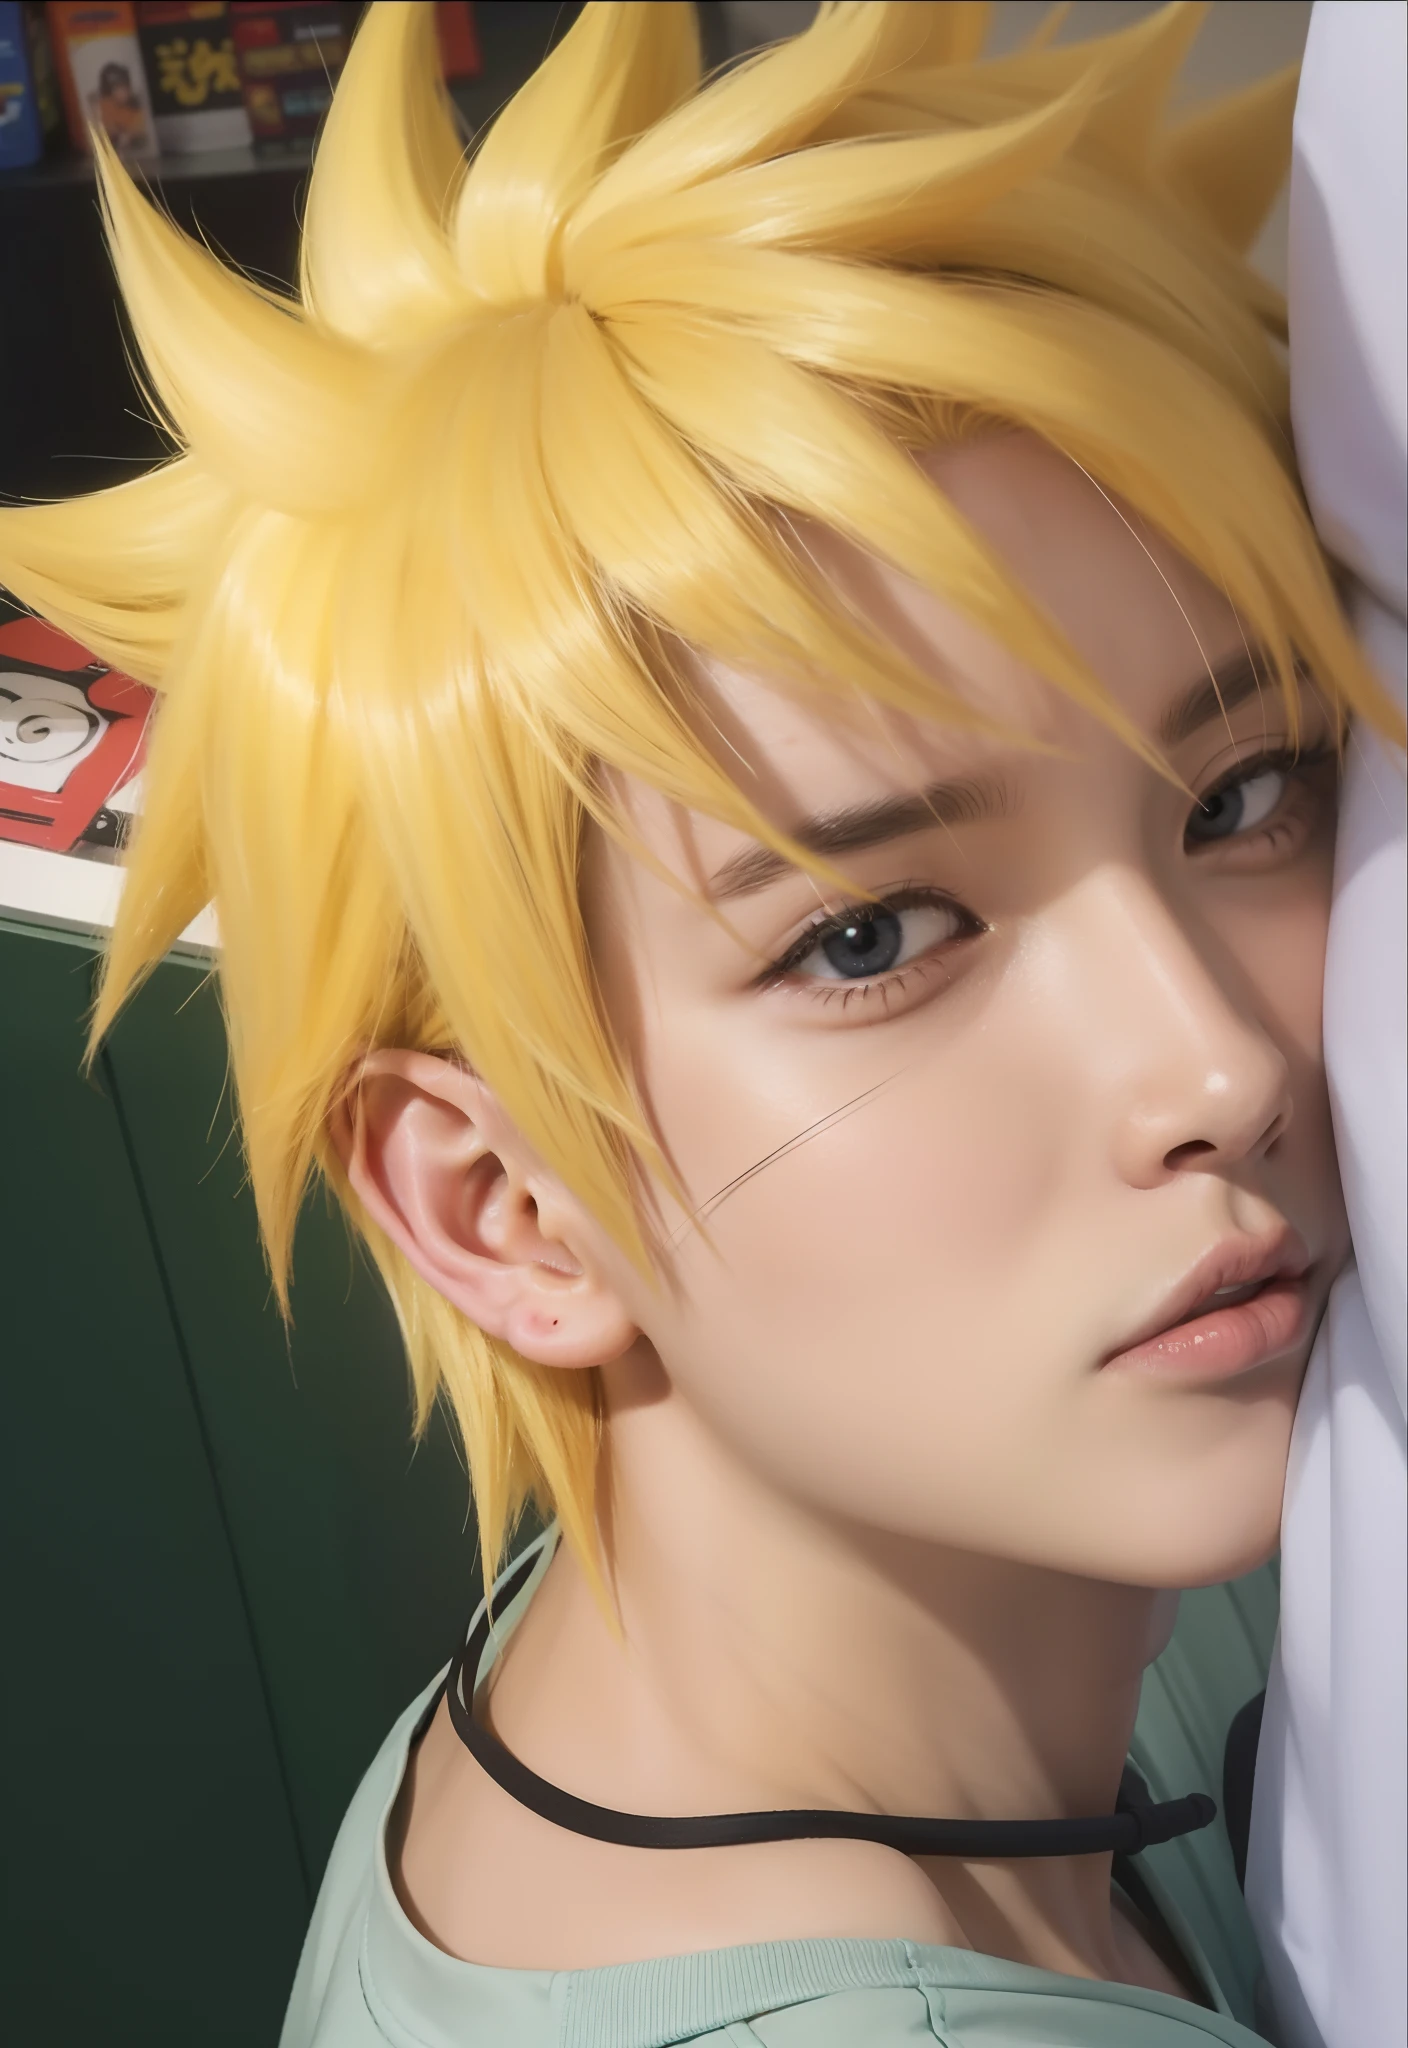 life adaption of this character,his name is Naruto uzumaki from anime Naruto,Korean teen handsome face,(sleepy expression),realistic yellow messy hair ,realistic light,realistic shadow,hyper realistic,realism,(photorealistic:1.2)